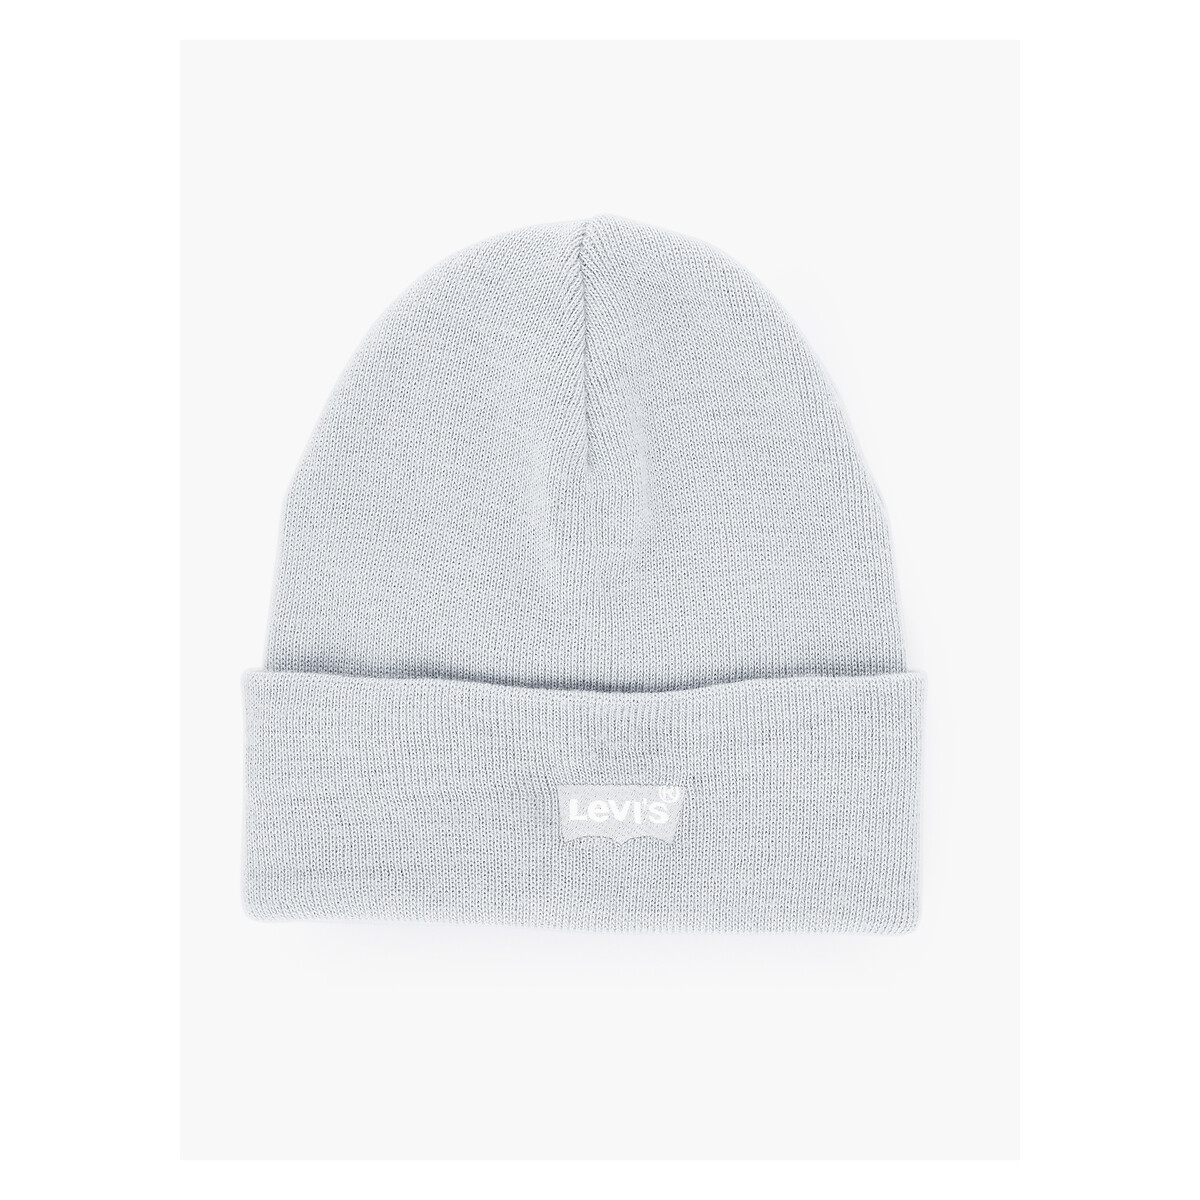 Image of Tonal Batwing Slouchy Beanie